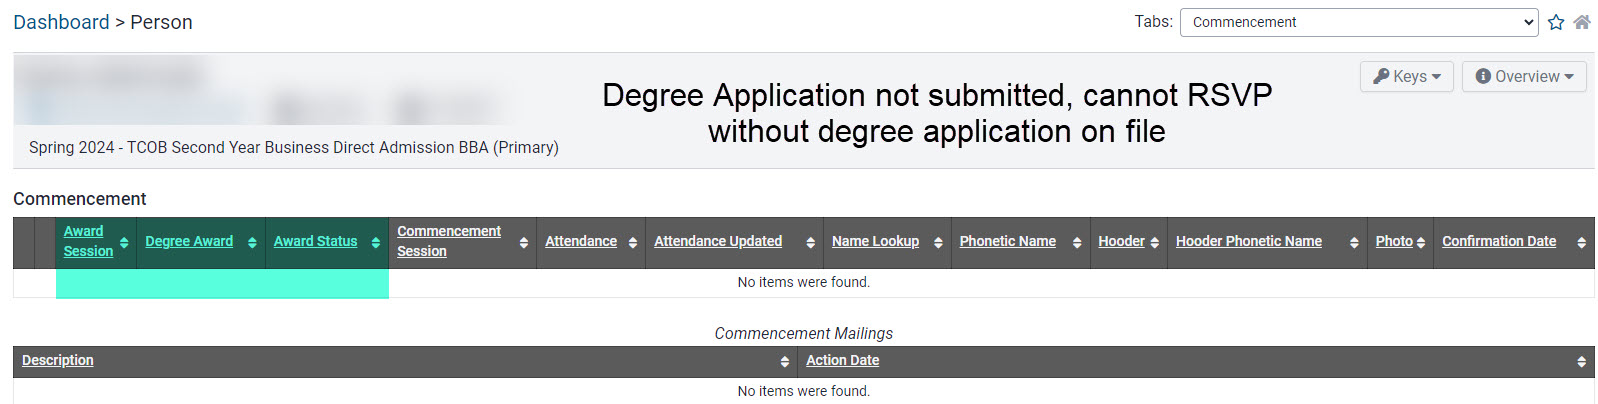 Commencement panel showing no degree application on file. 